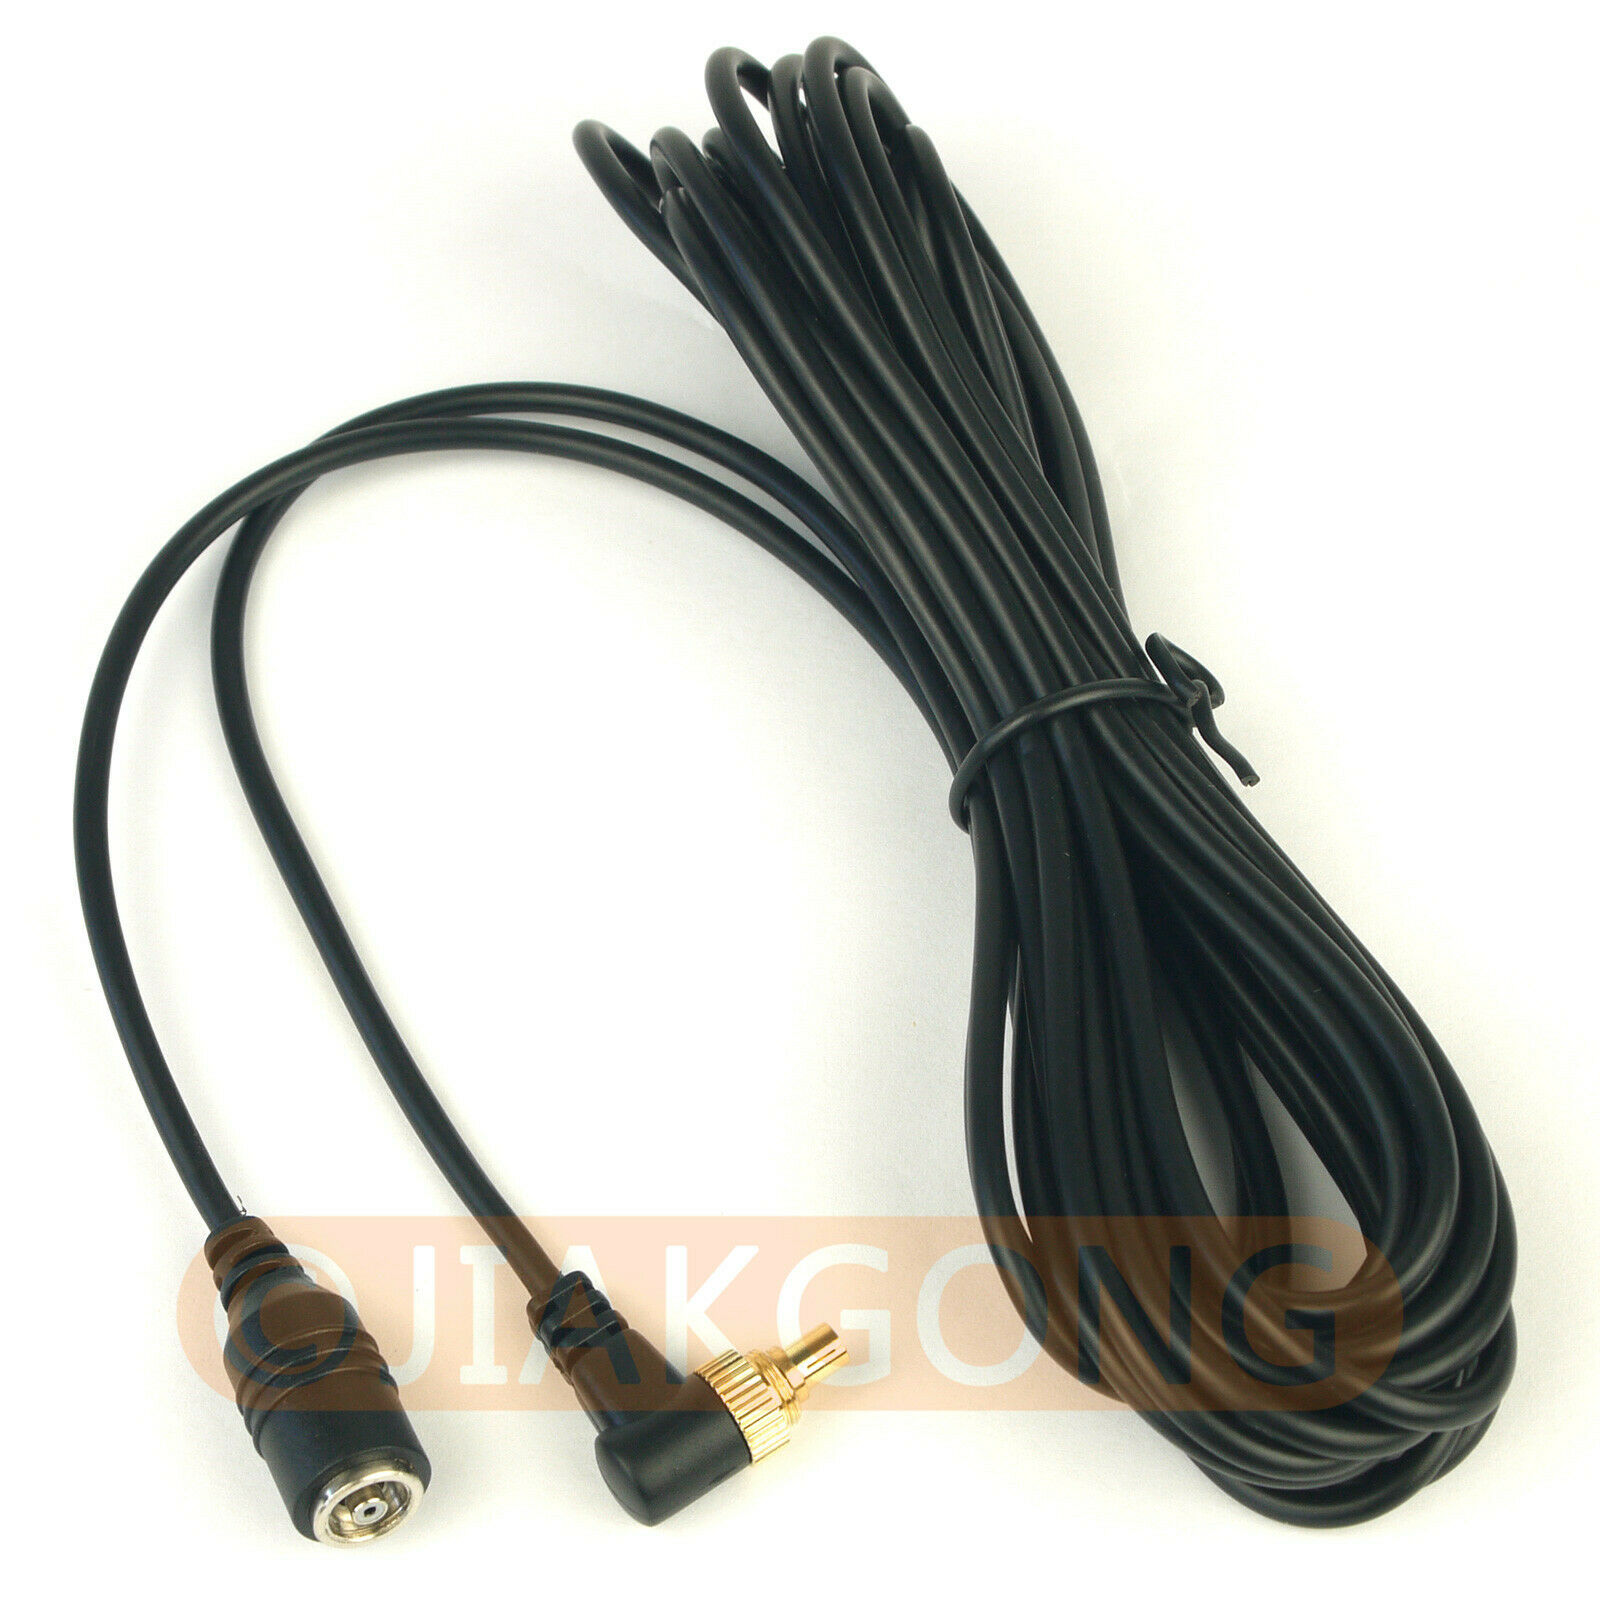 DSLRKIT 5M 16ft Male to Female PC Sync FLASH Cable with Screw Lock